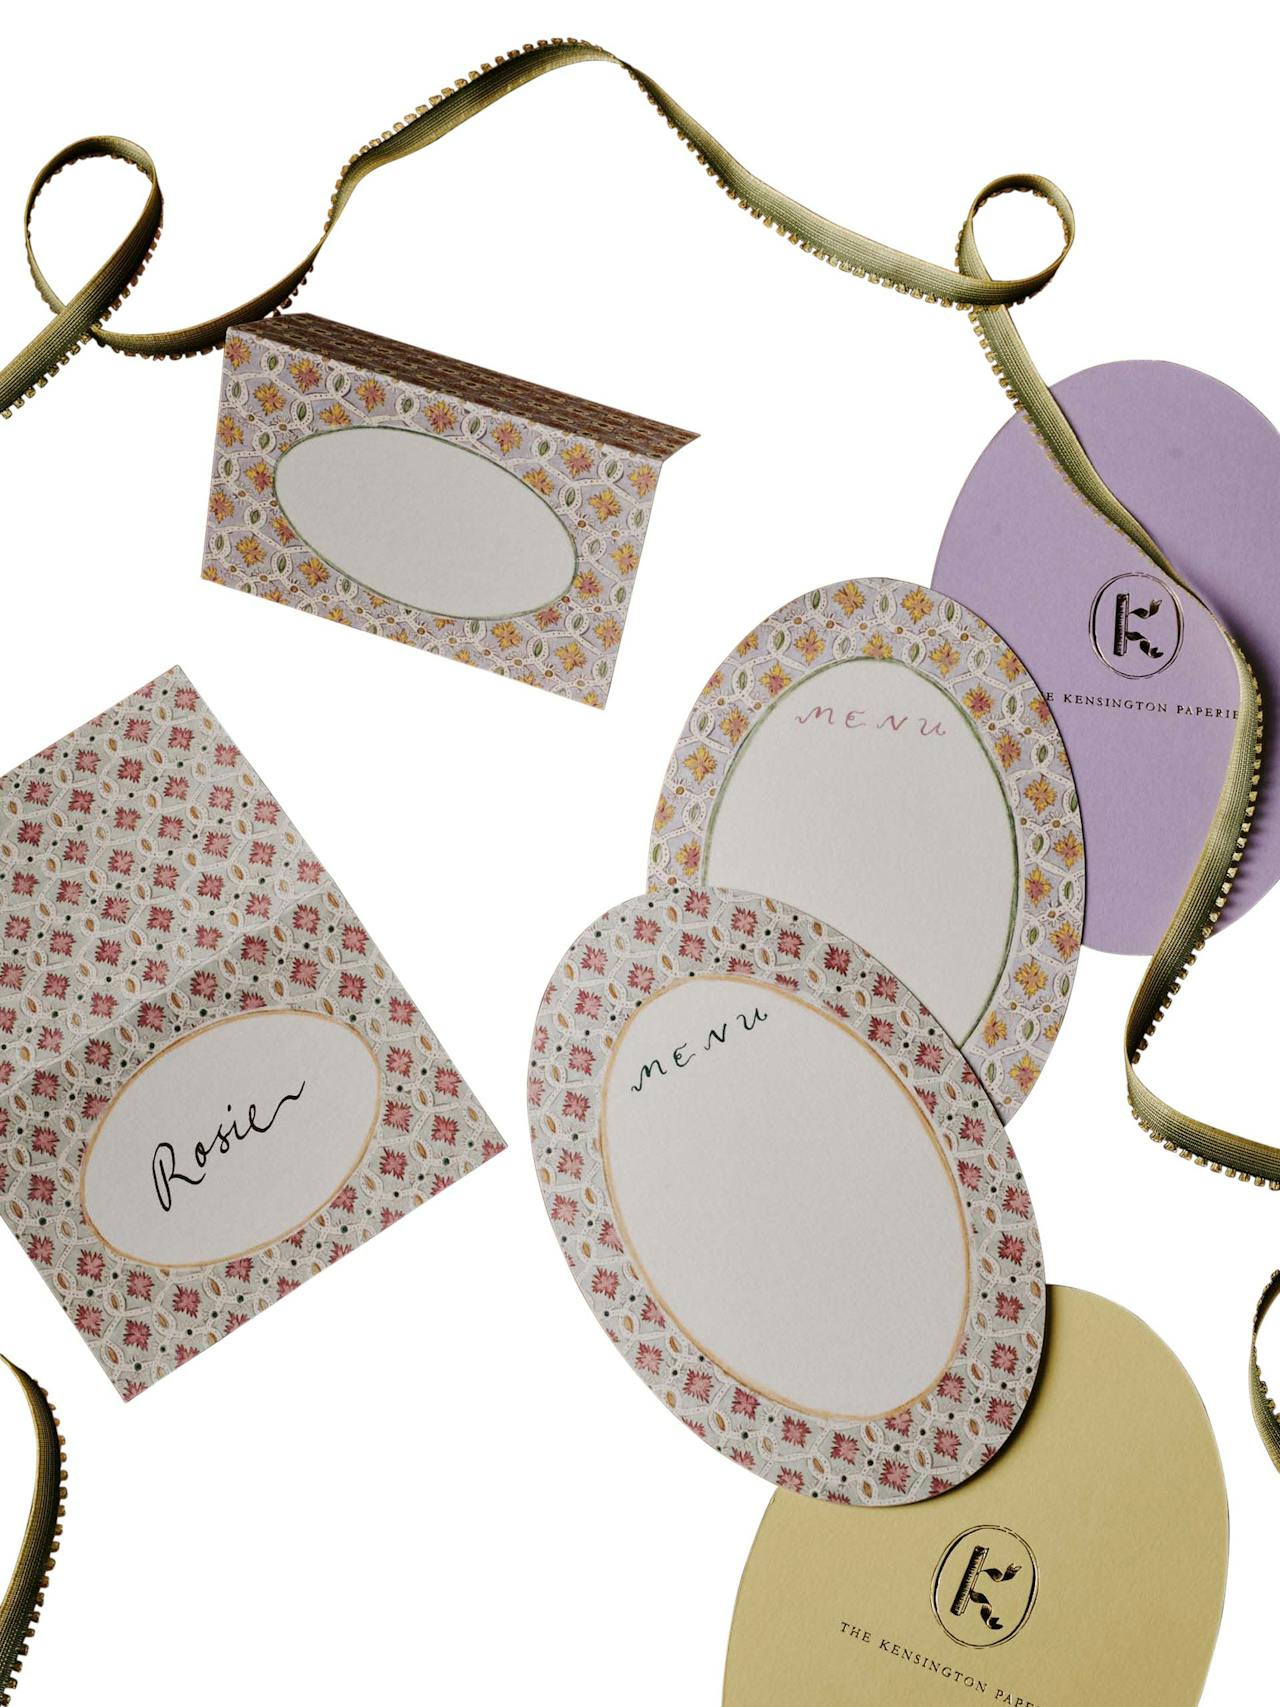 Neville Chain menu and placecard set